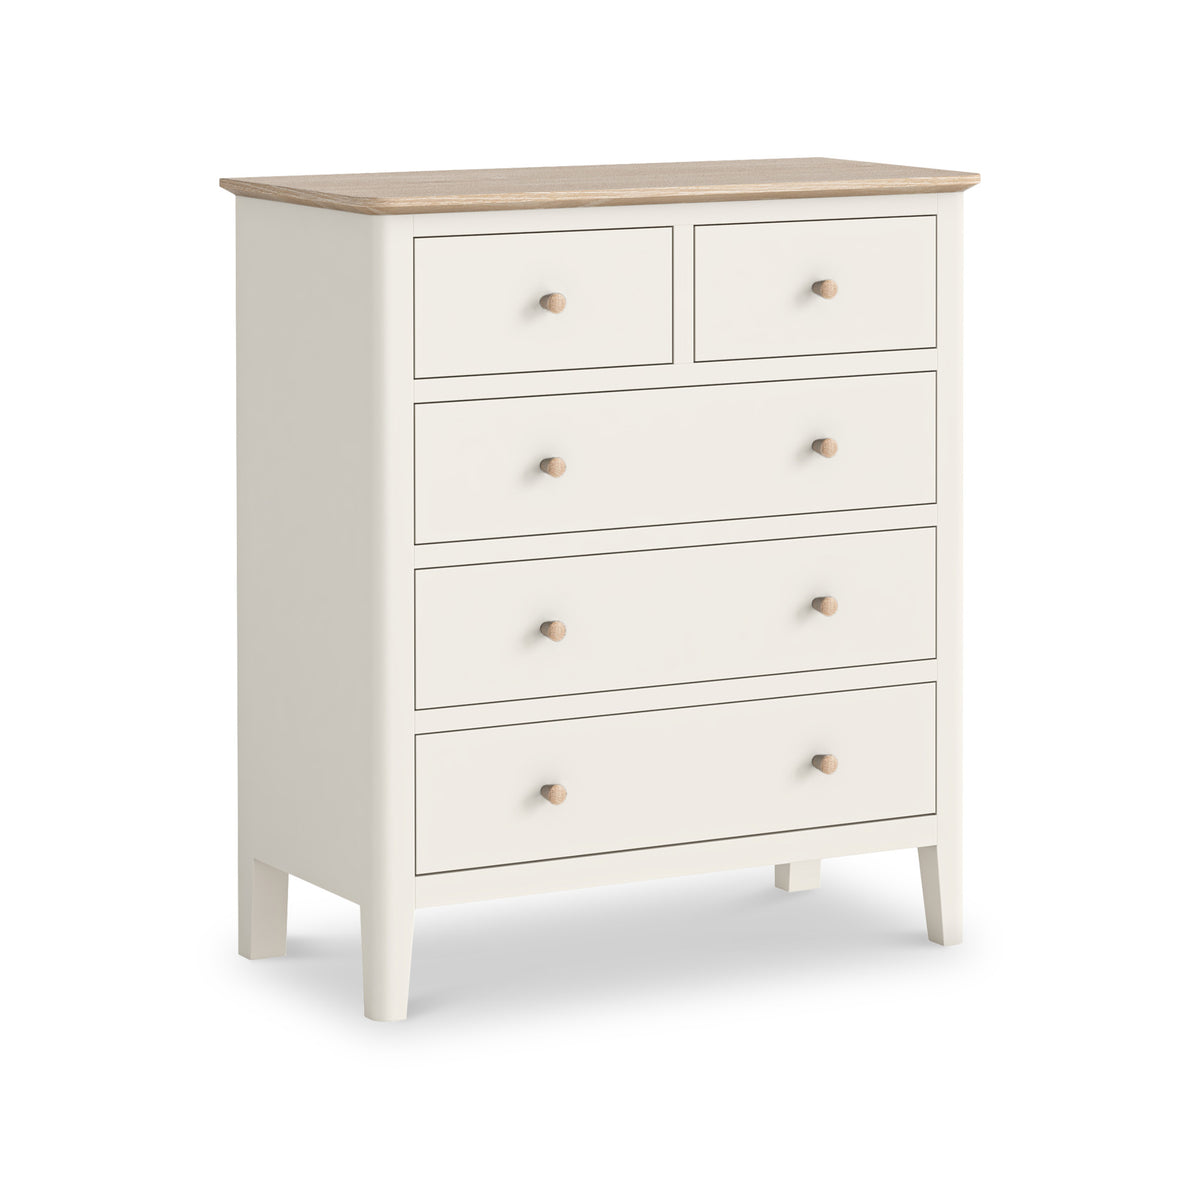 Penrose Coconut White 2 Over 3 Chest with wooden handles from Roseland Furniture